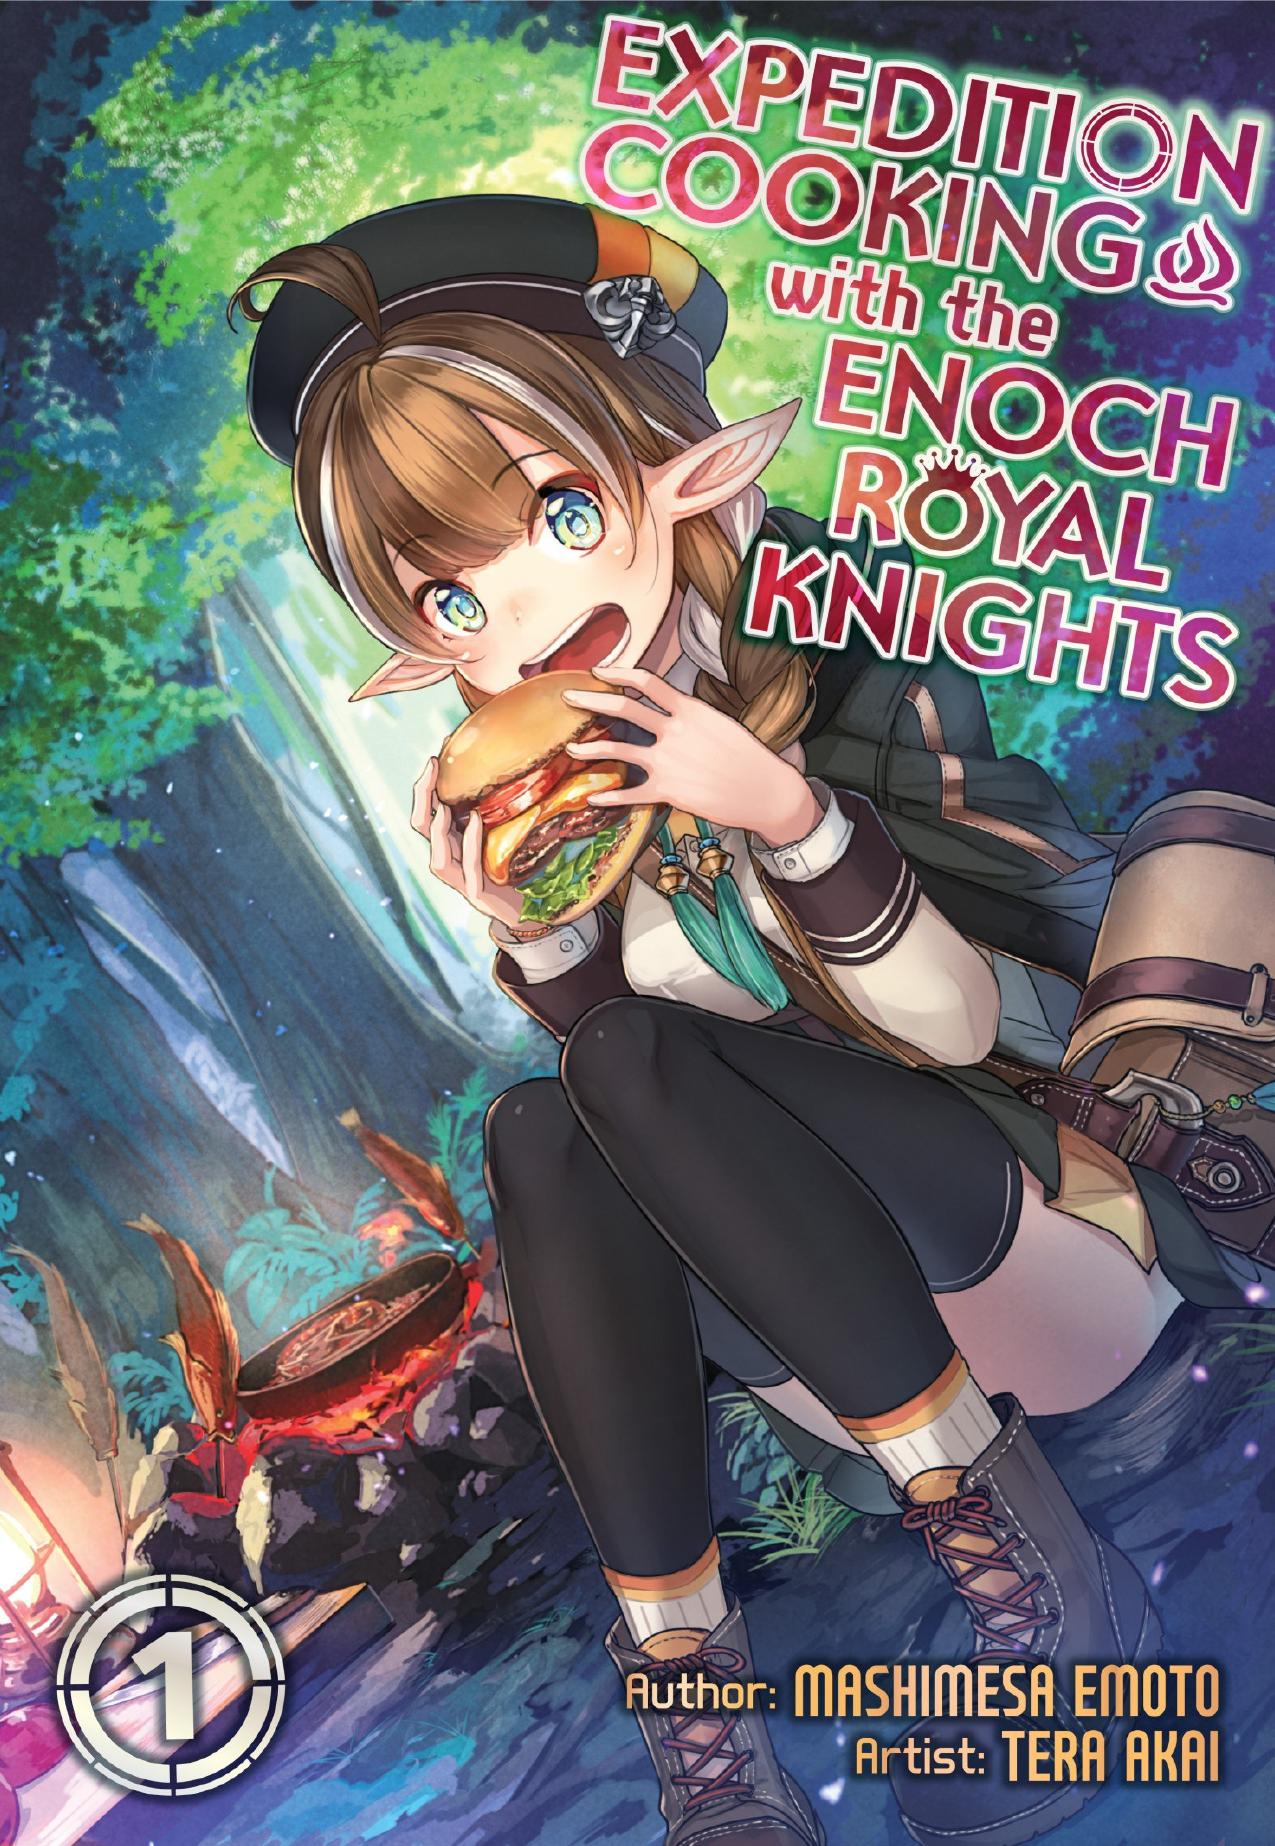 Expedition Cooking with the Enoch Royal Knights Volume 1 by Mashimesa Emoto